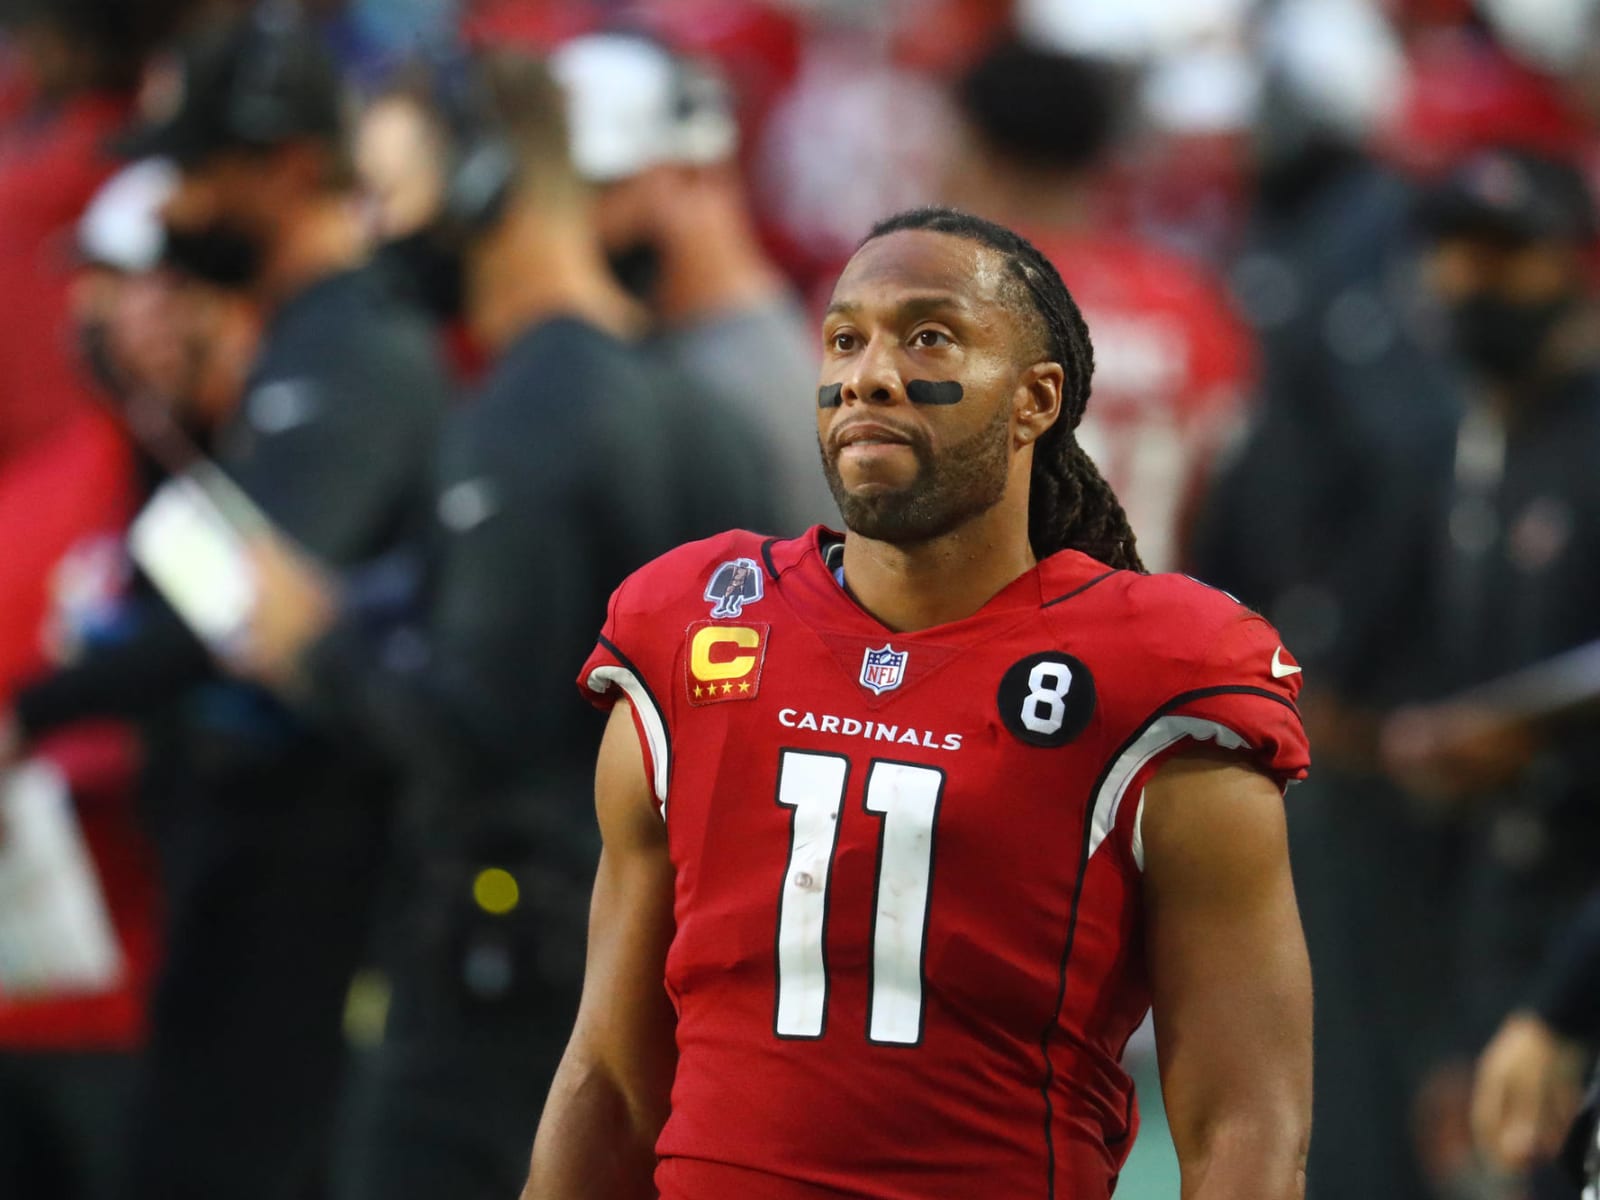 Larry Fitzgerald will not be returning to Arizona Cardinals